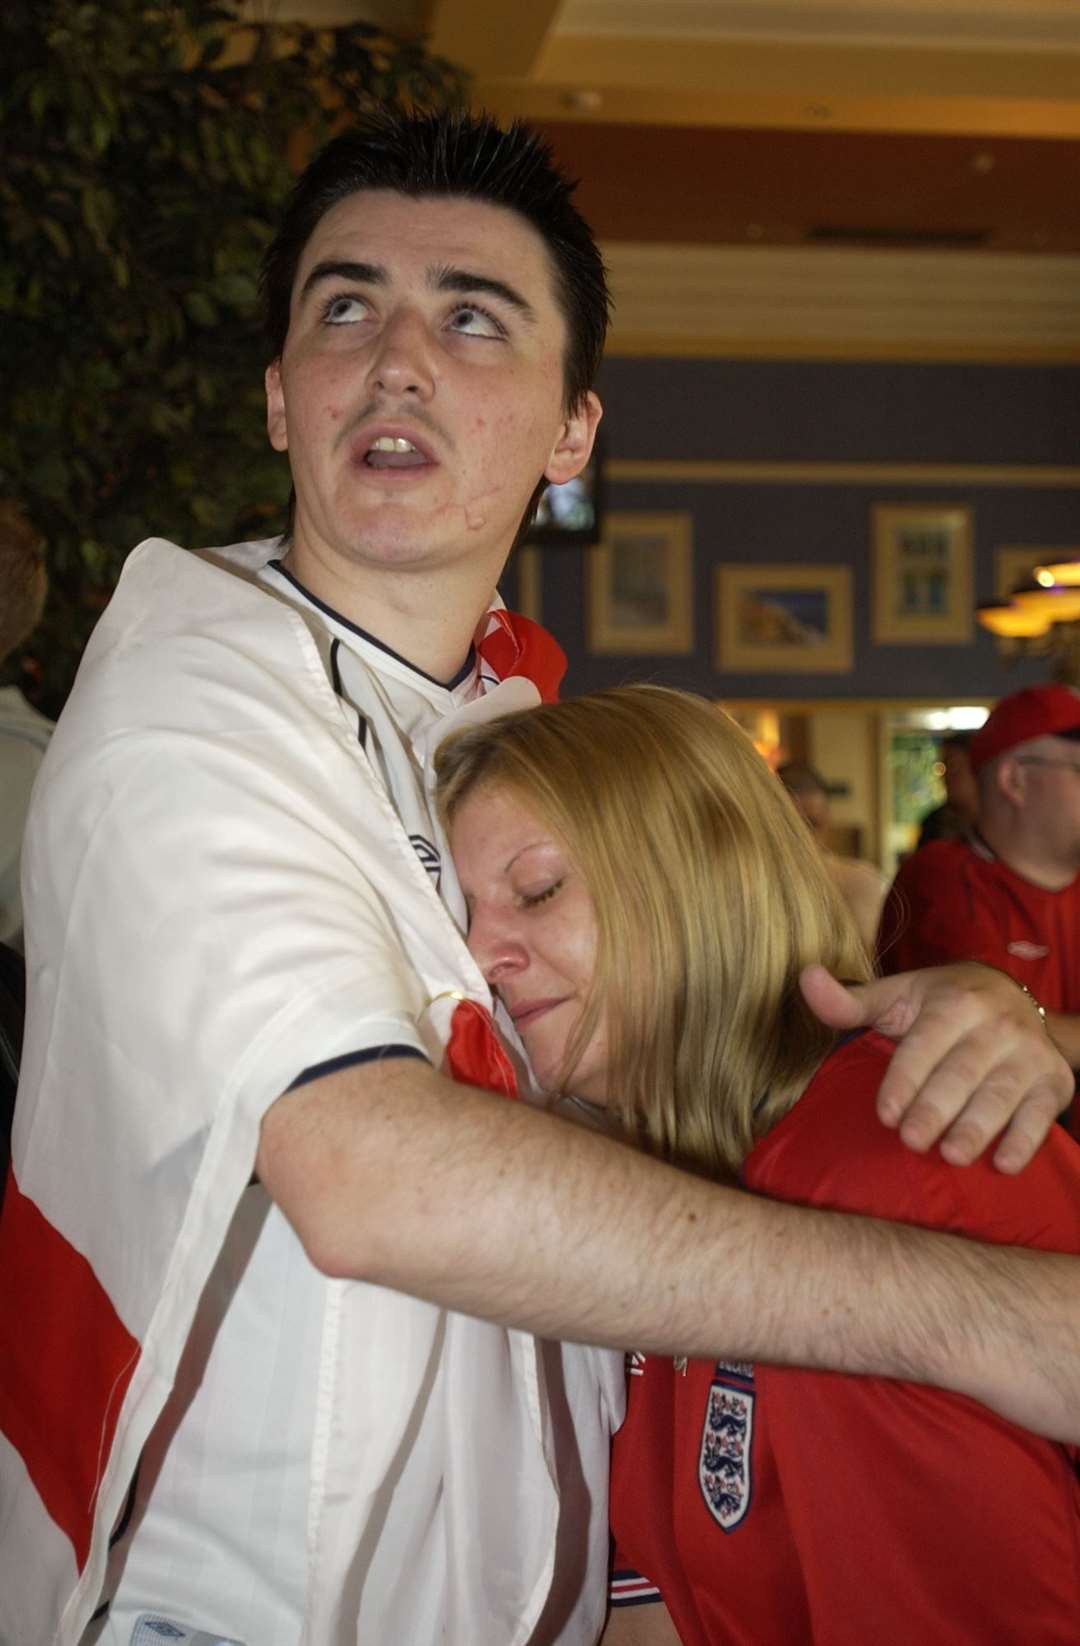 Fans at The Litten Tree console each other after the final whistle